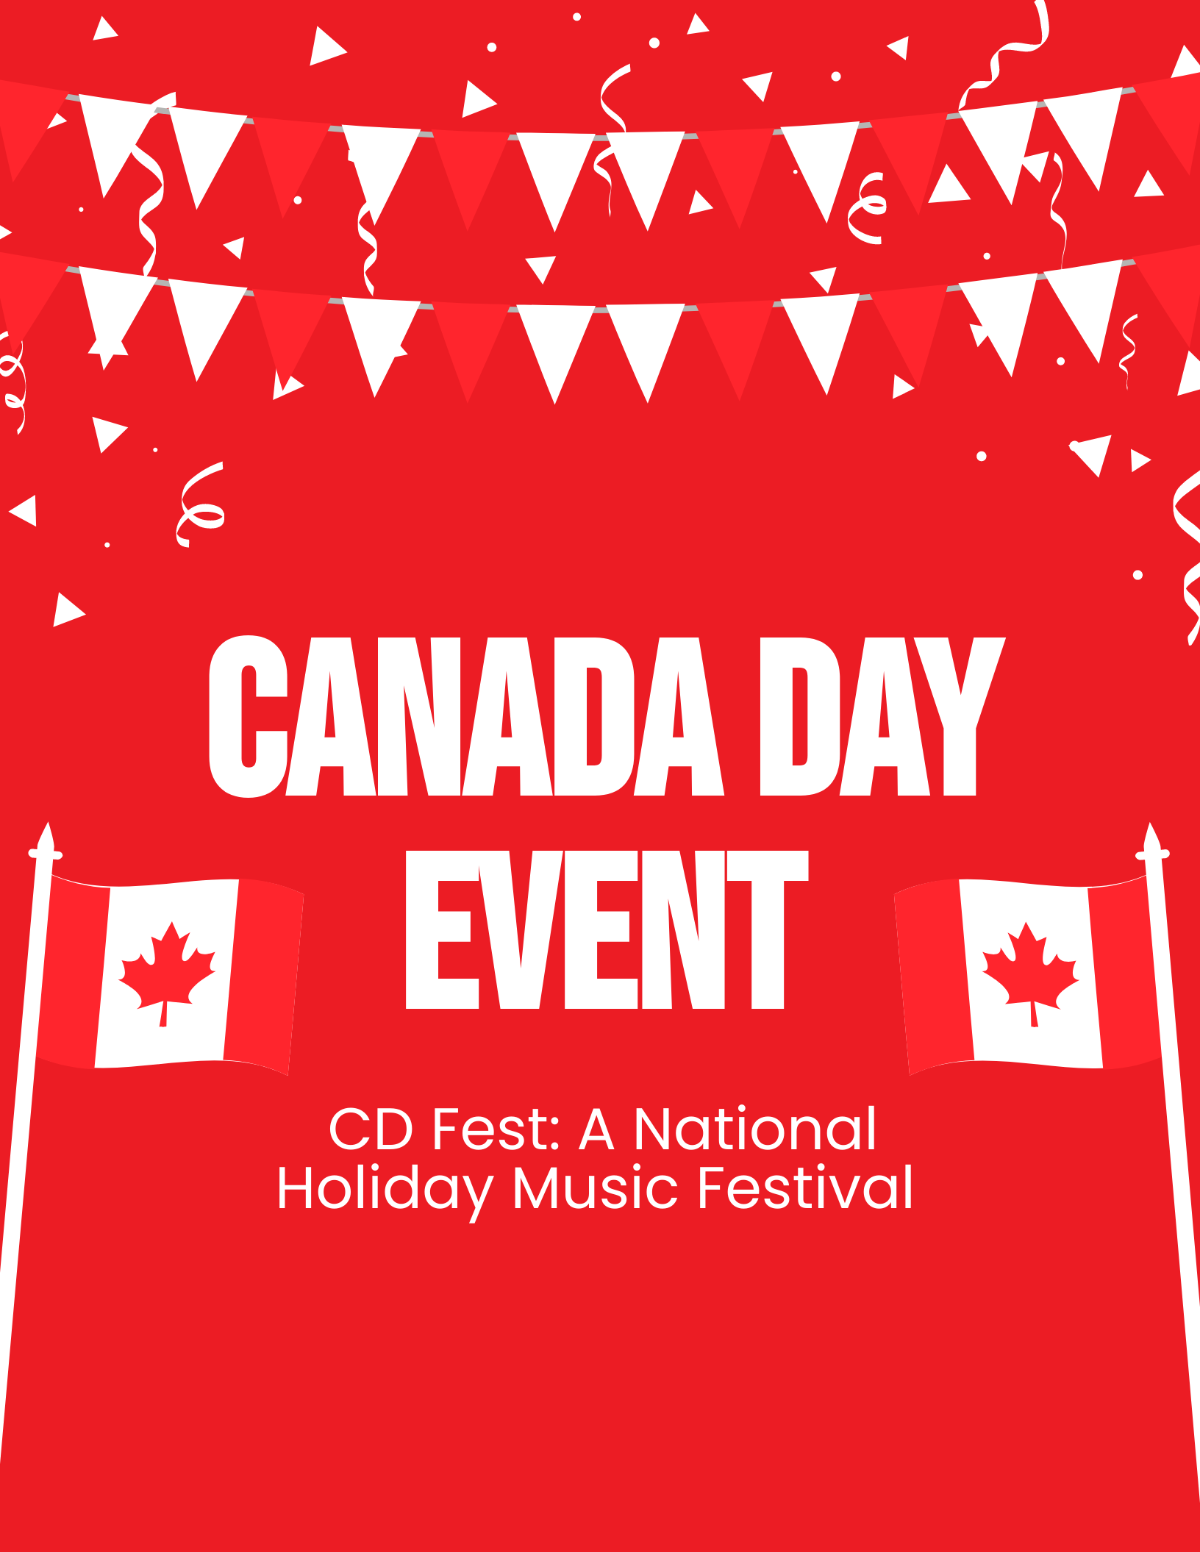 Free Canada Day Event Flyer Template